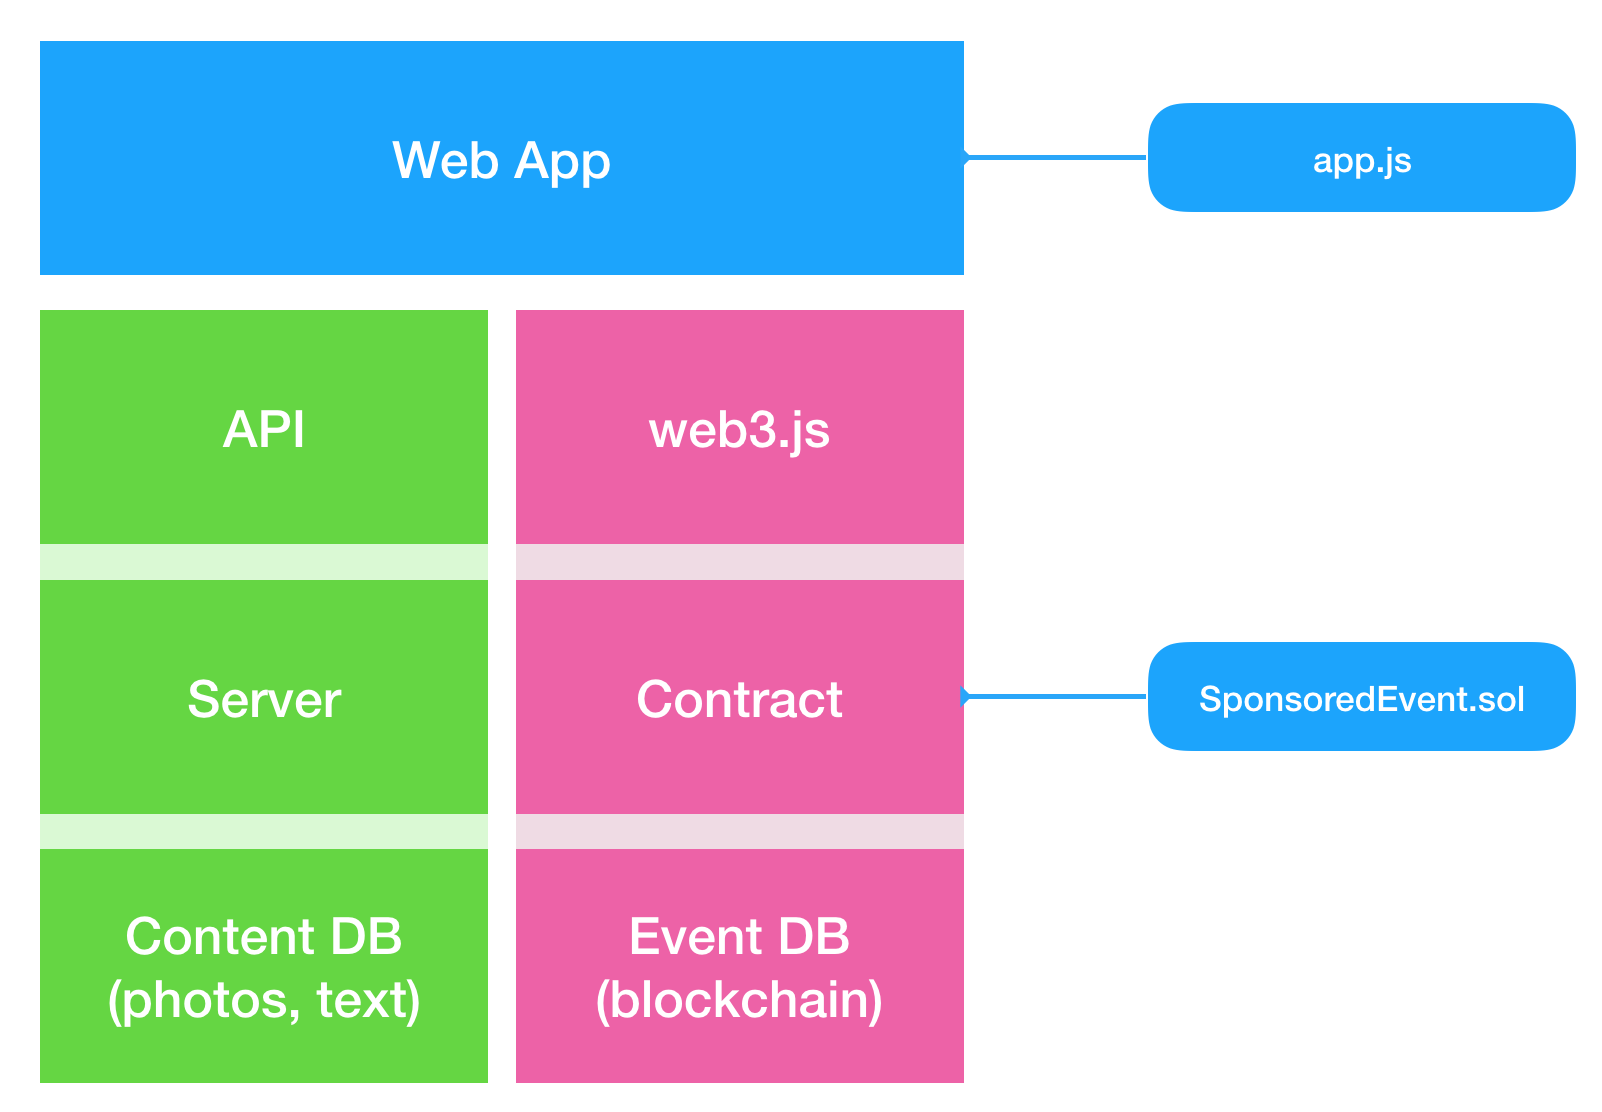 Structure of Web App